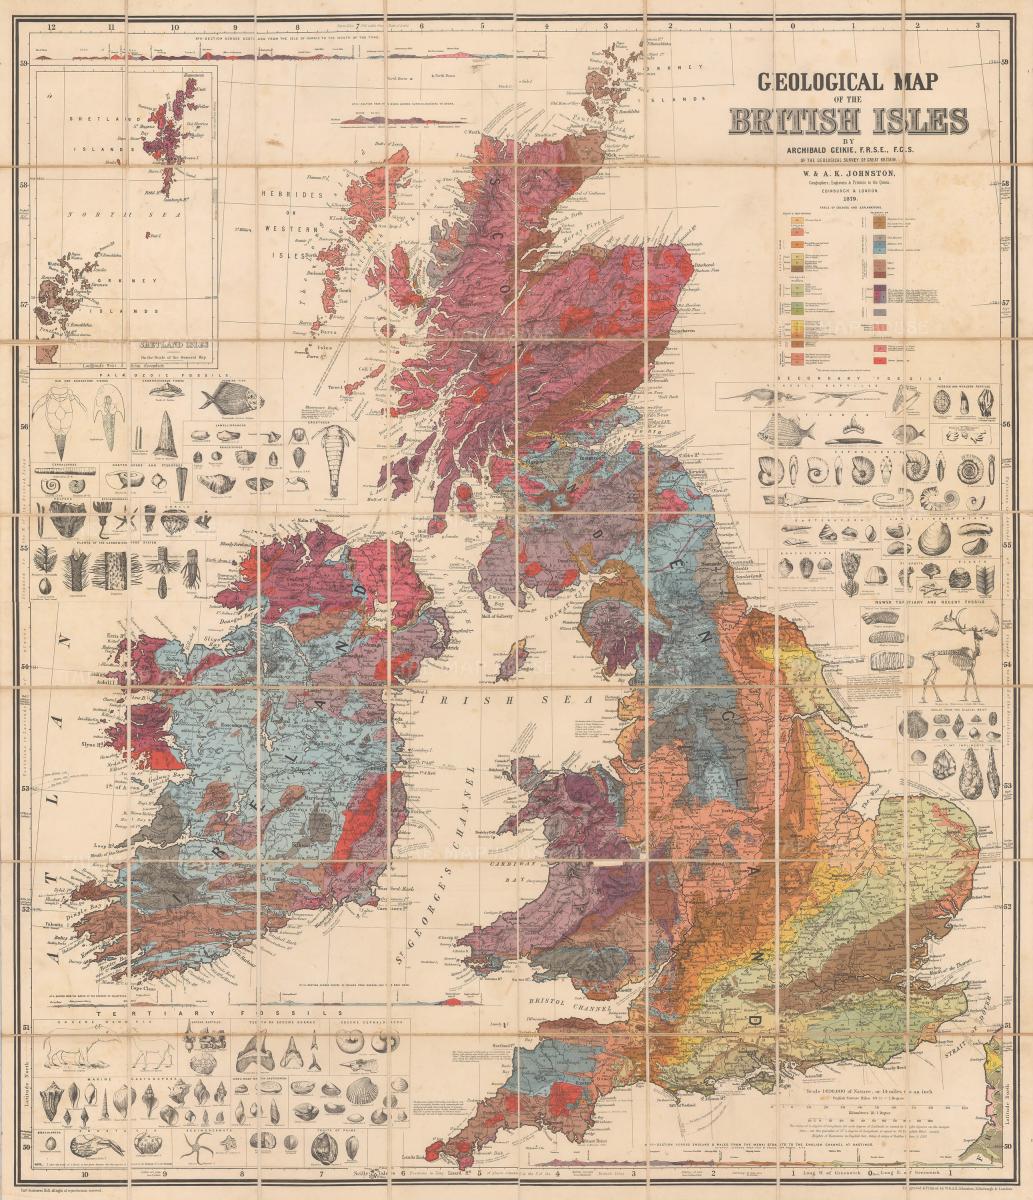 Sir Archibald Geikie: "Geological Map of the British Isles"